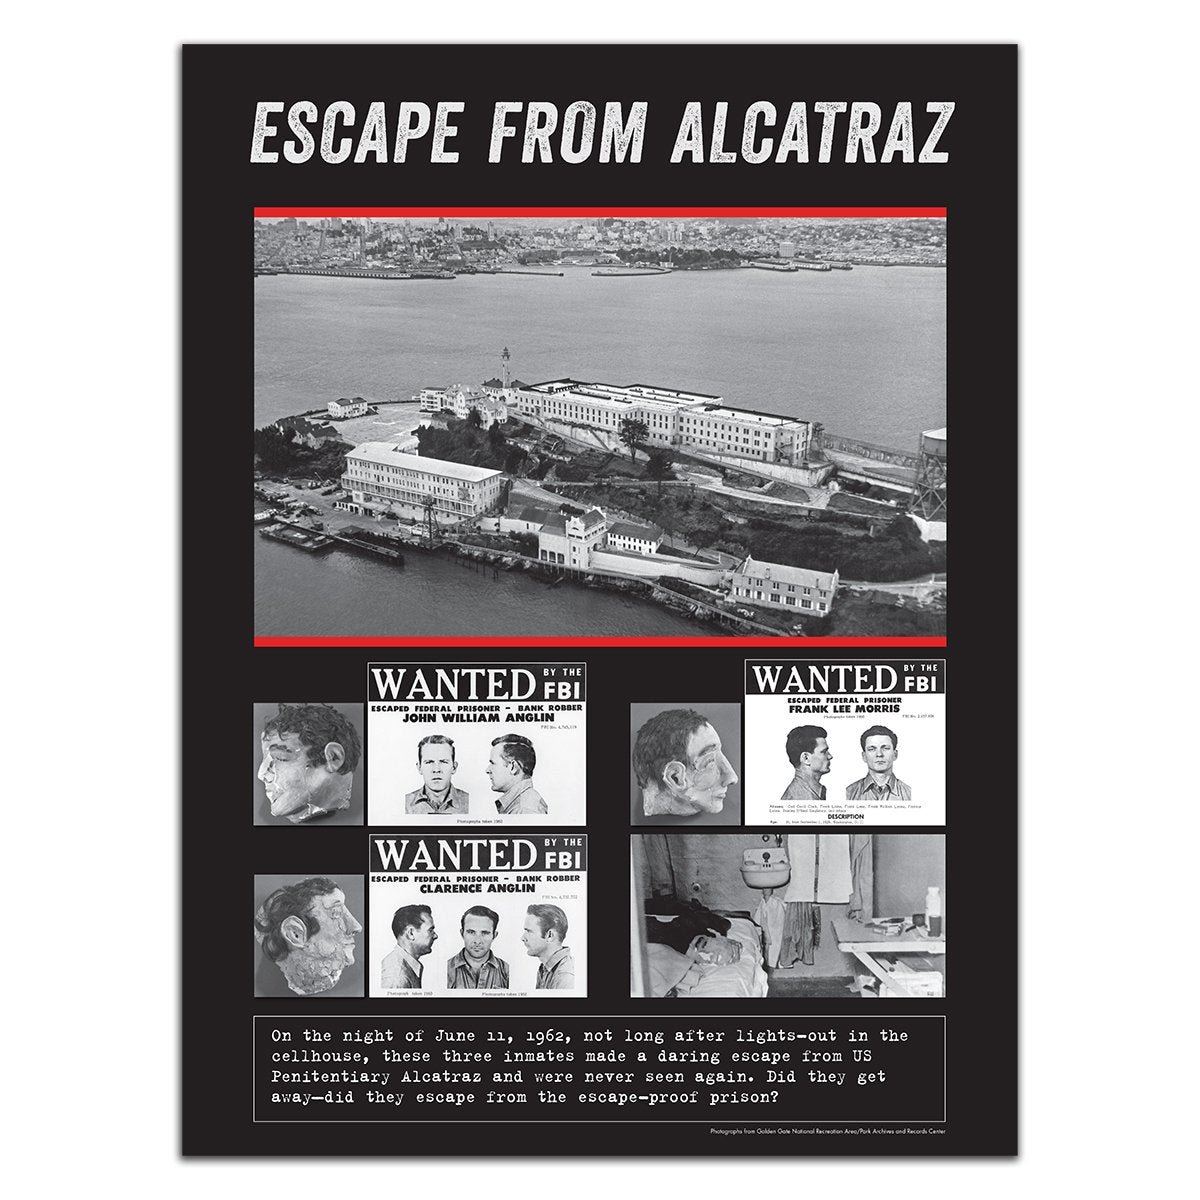 18 x 24 inch 1962 Escape from Alcatraz poster, featuring black-and-white historical photograph of island and inmates.